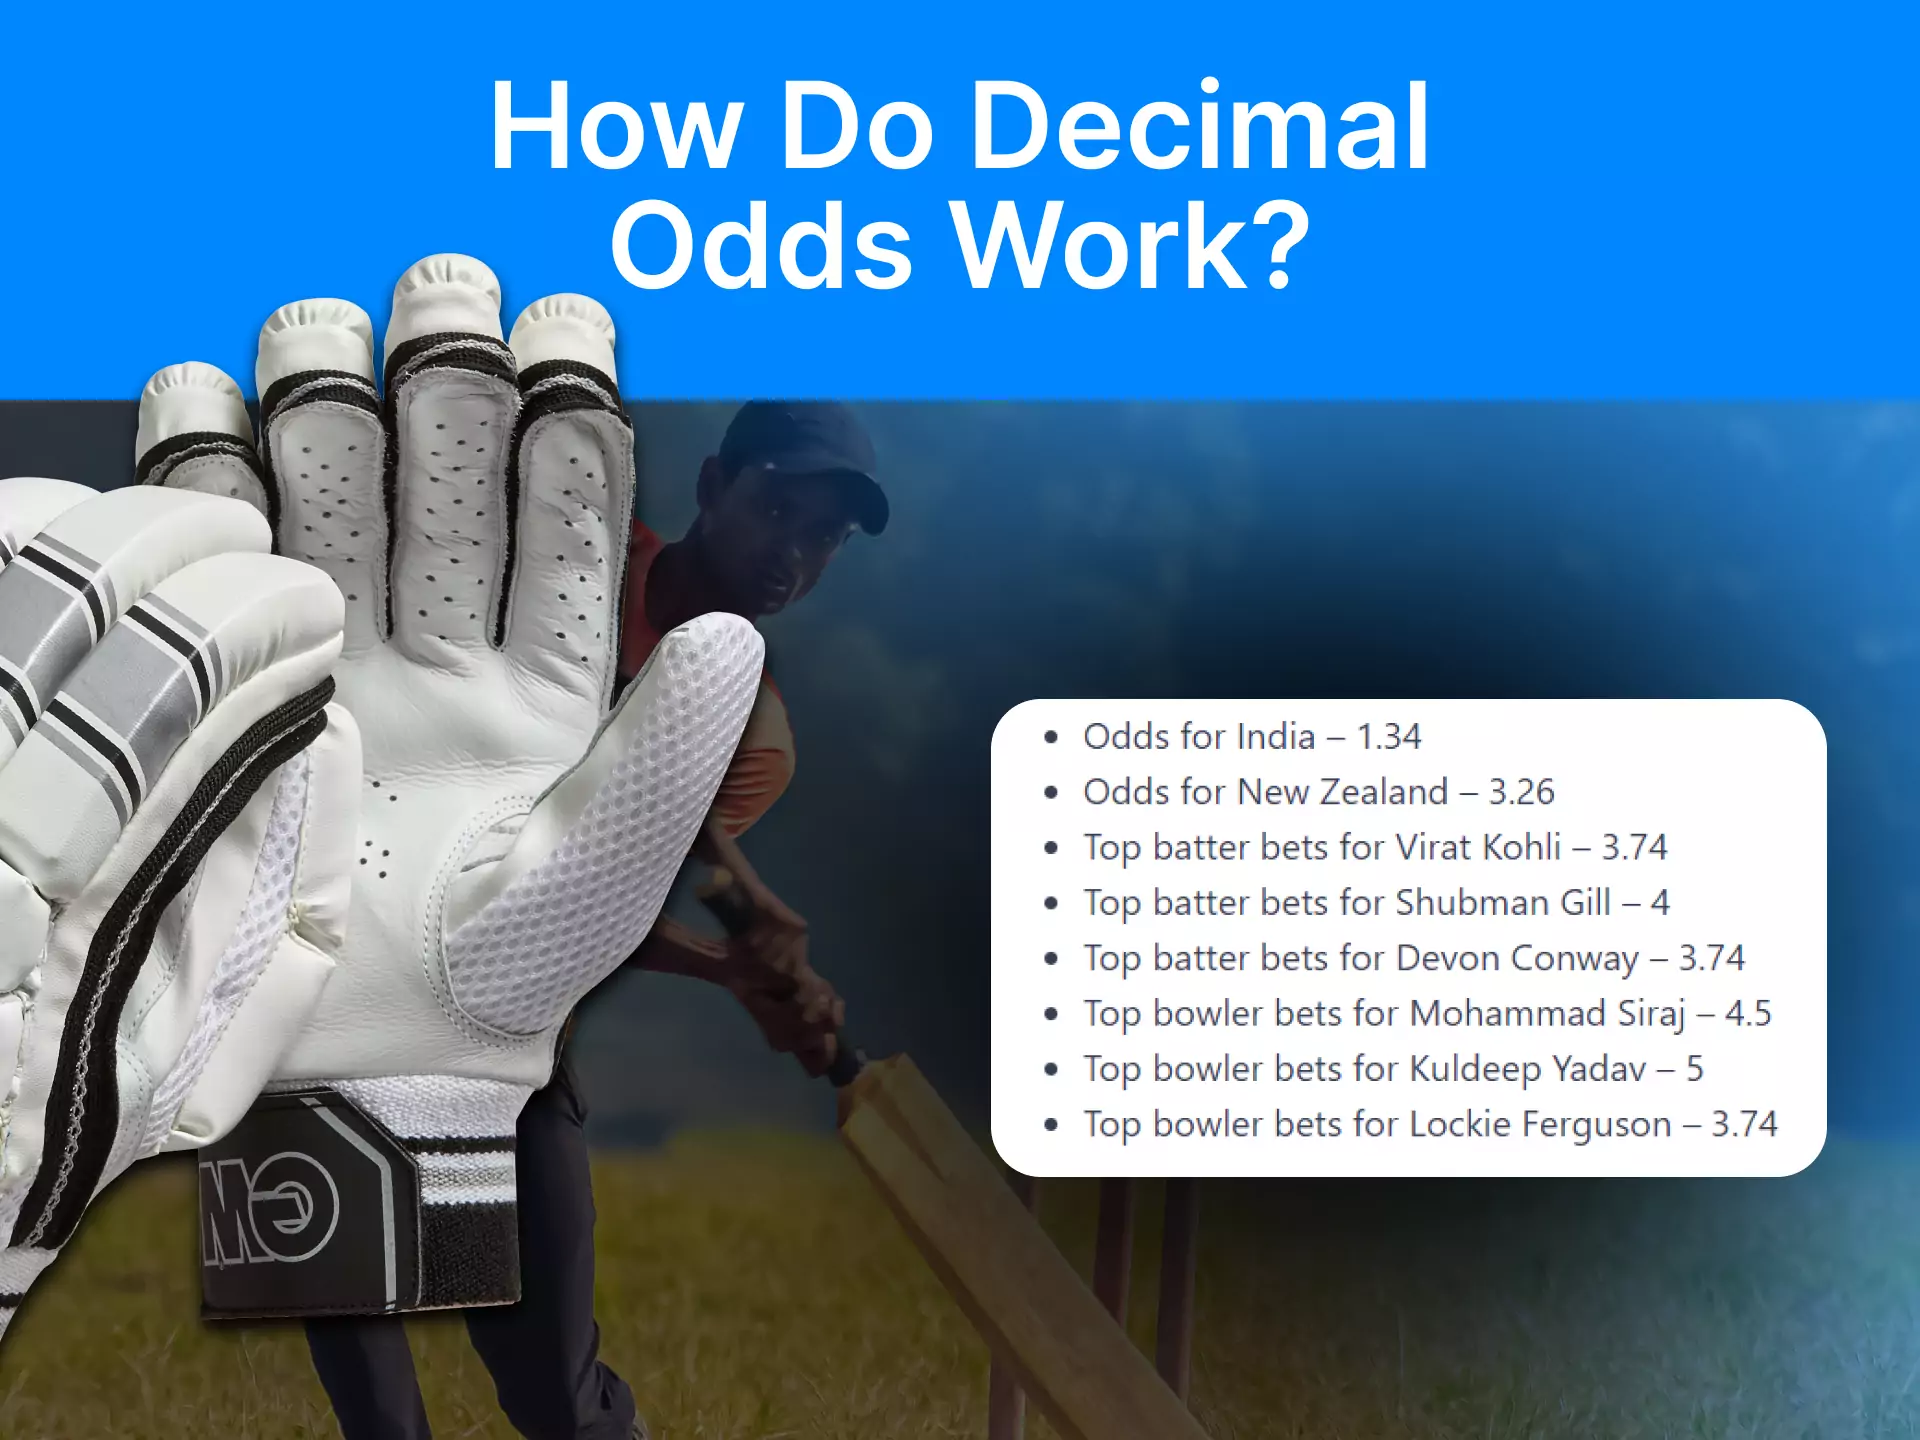 Learn how decimal odds work and what they affect in betting.